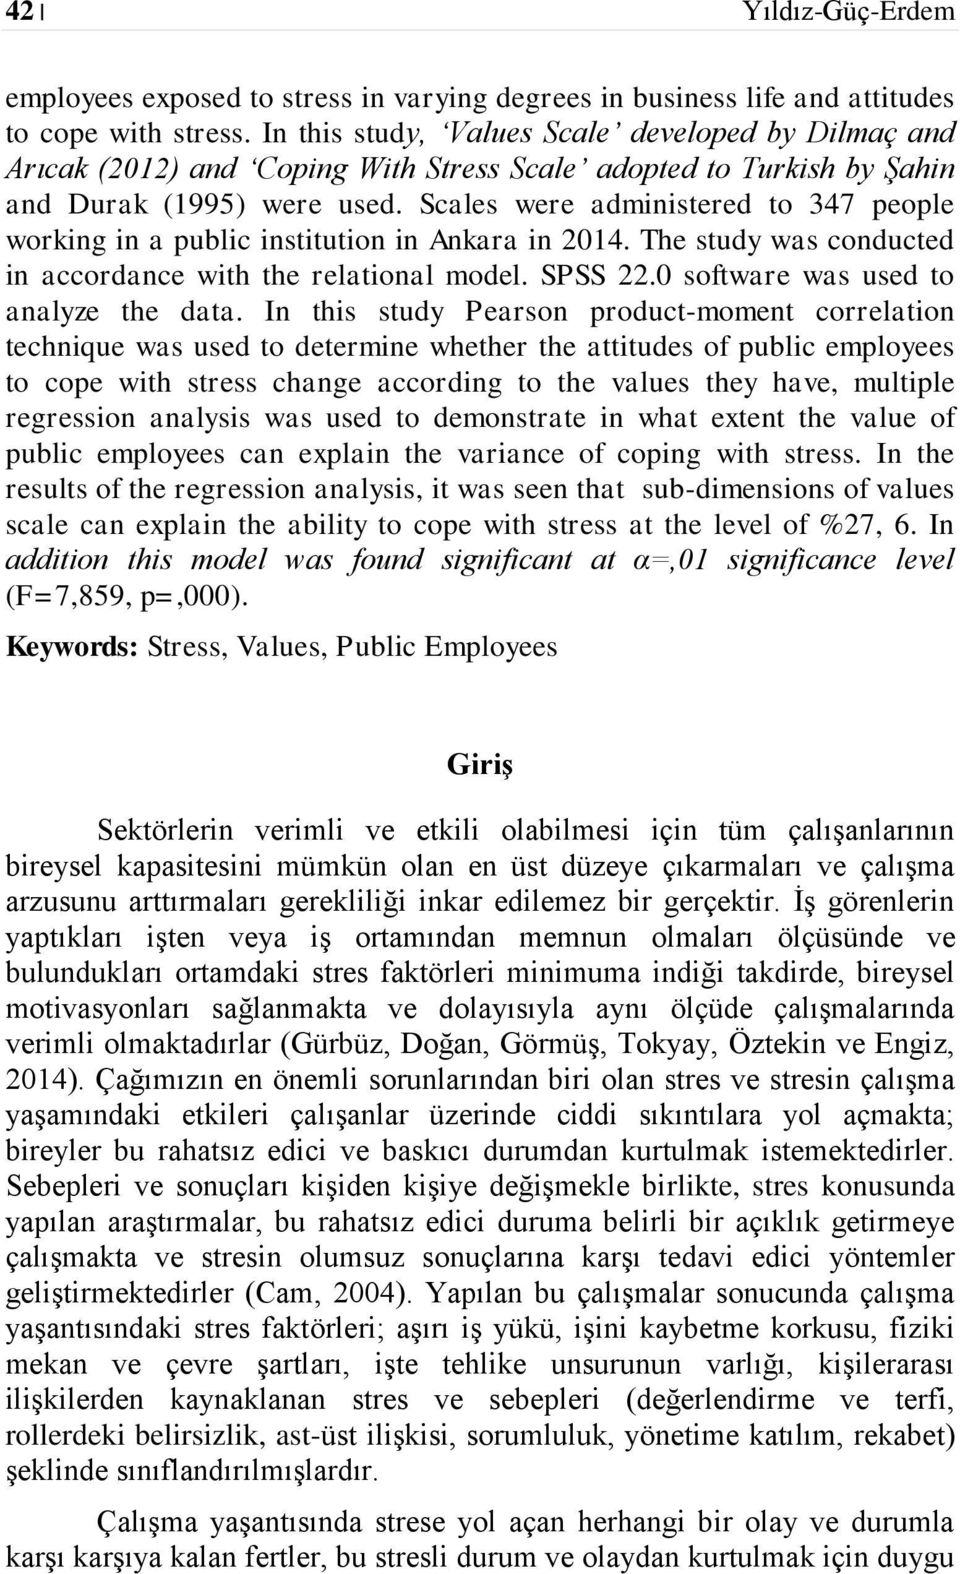 Scales were administered to 347 people working in a public institution in Ankara in 2014. The study was conducted in accordance with the relational model. SPSS 22.